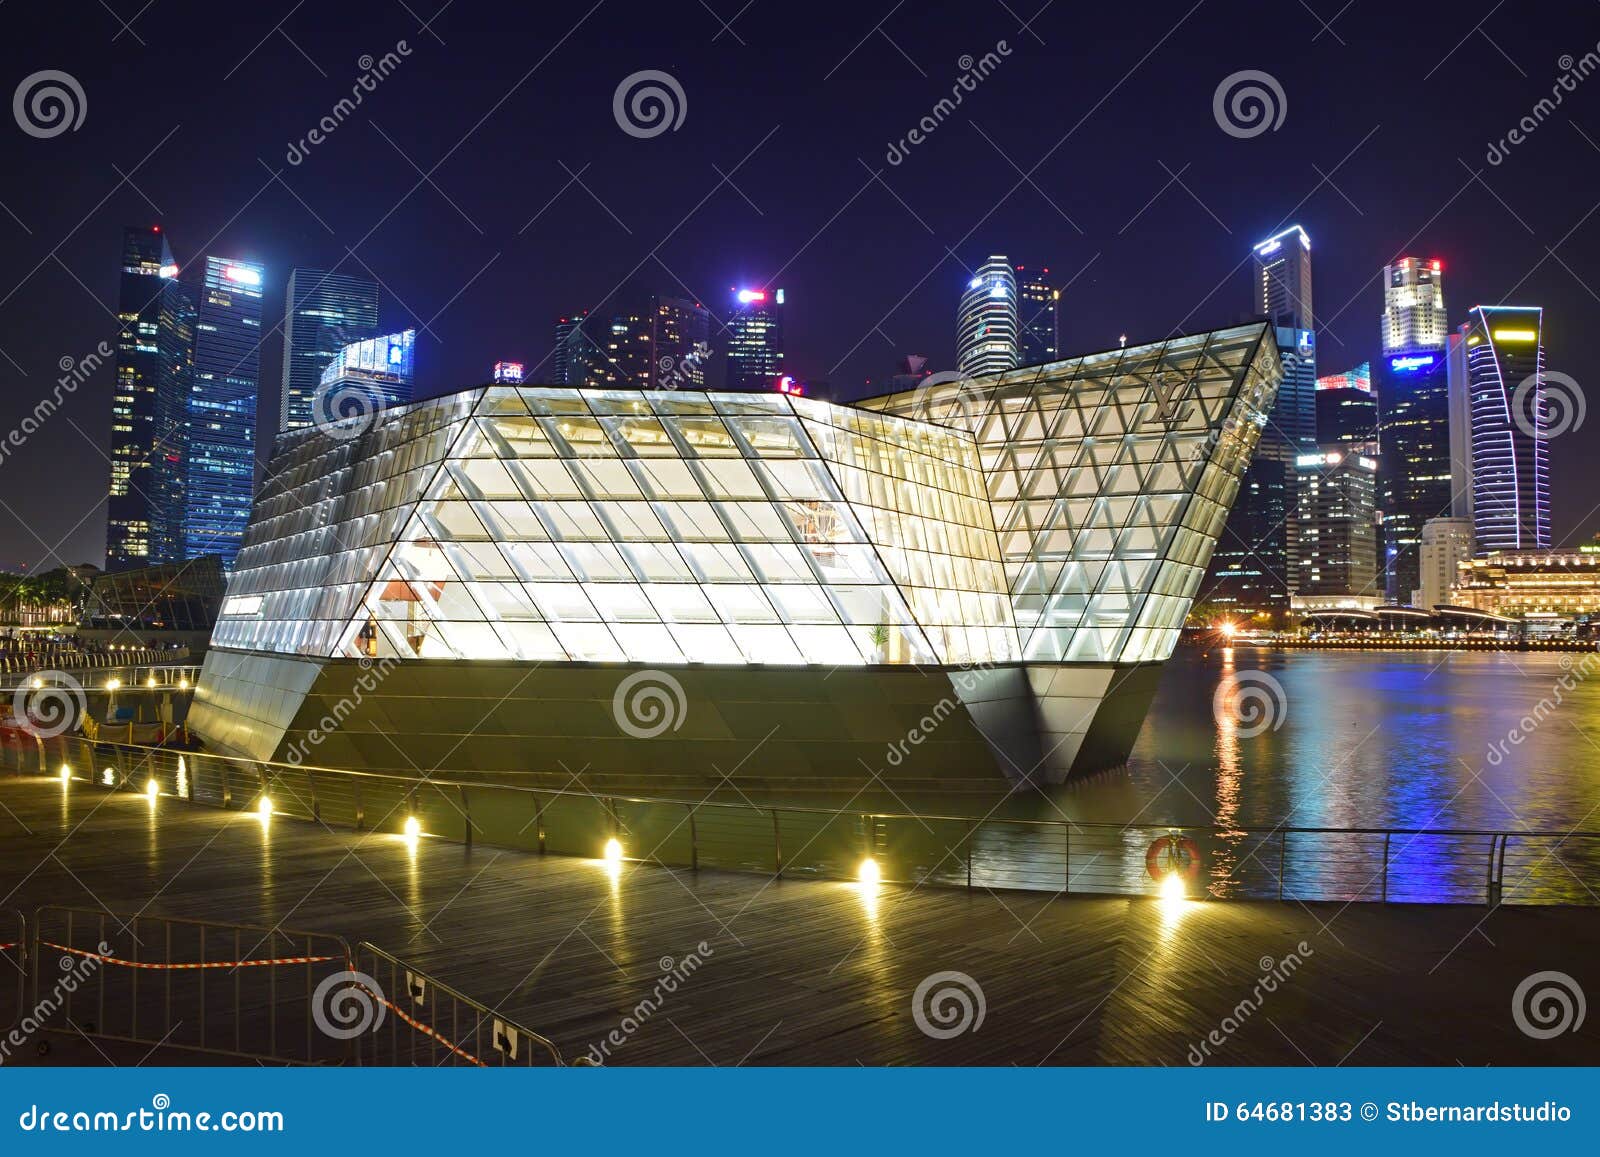 Louis Vuitton Island Maison (Floating Boutique) at Marina Bay